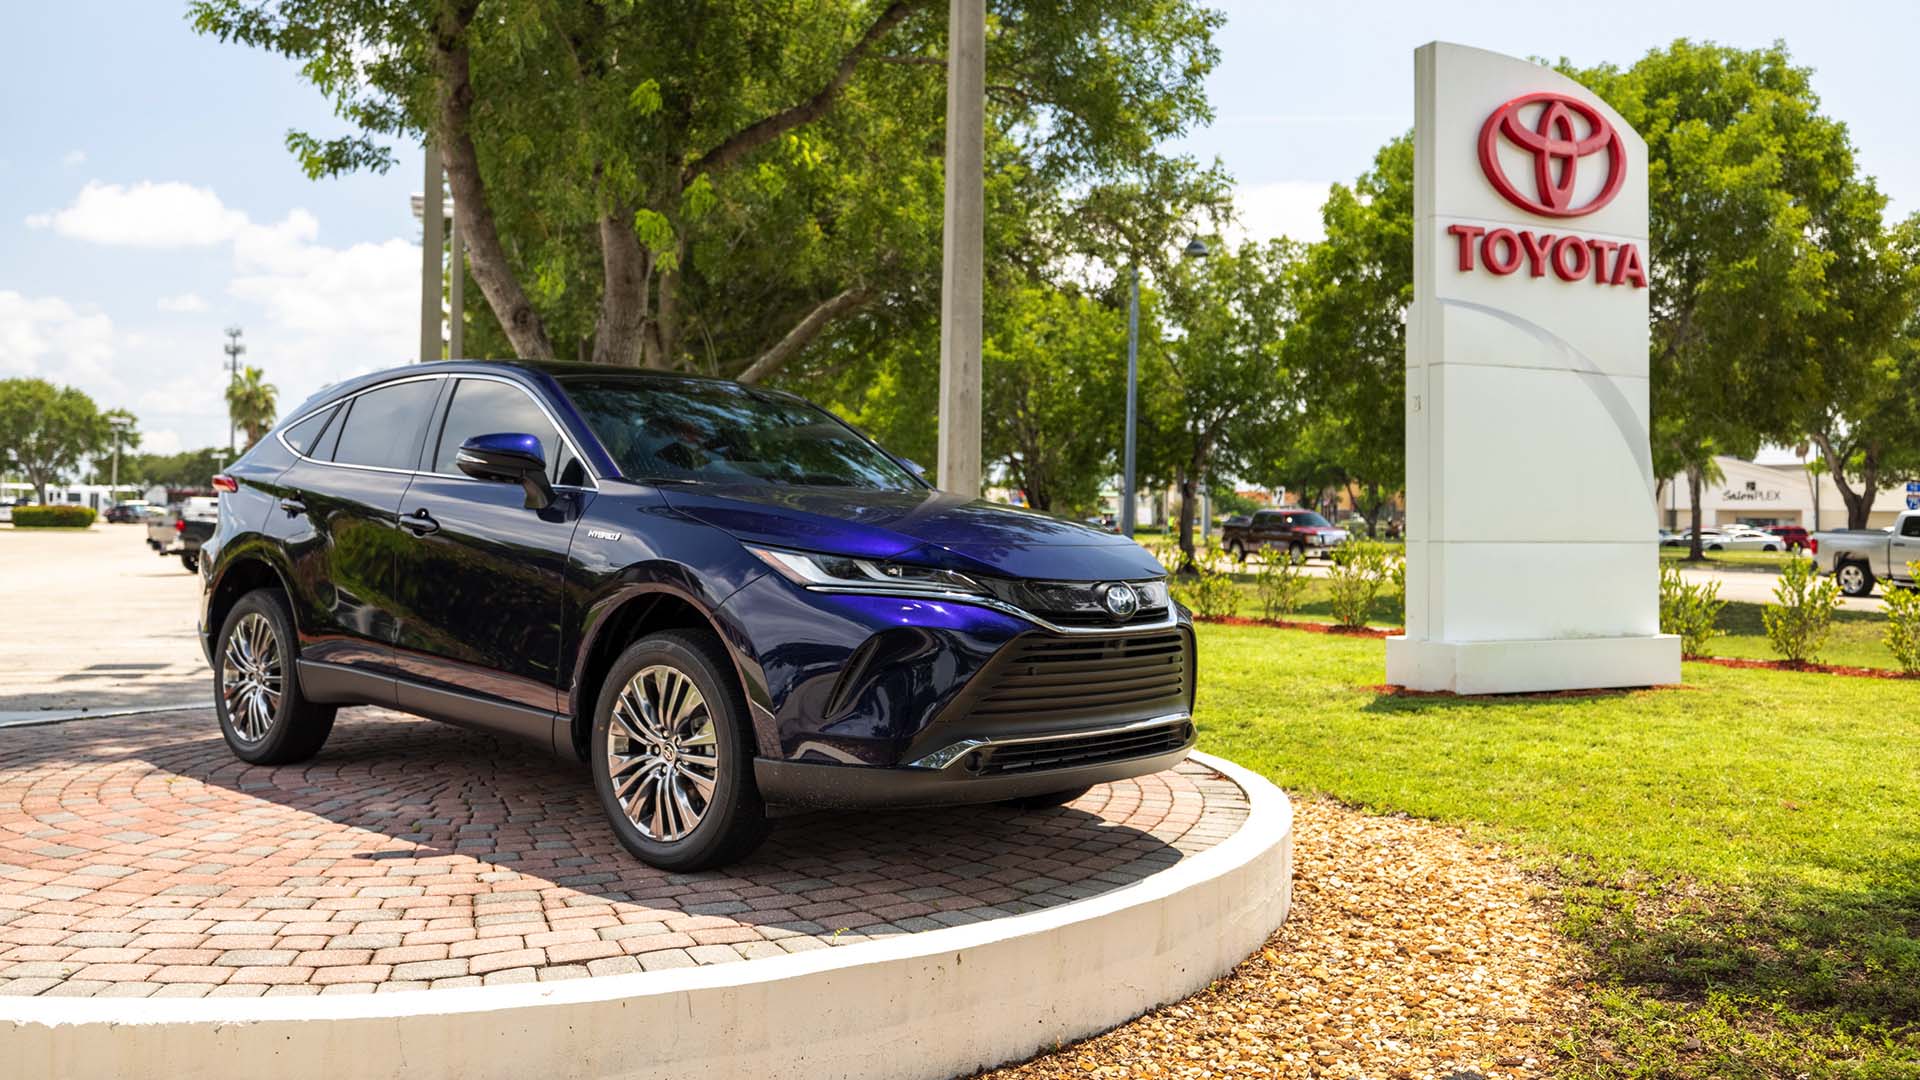 Exterior view of AutoNation Toyota Fort Myers signage and car lot